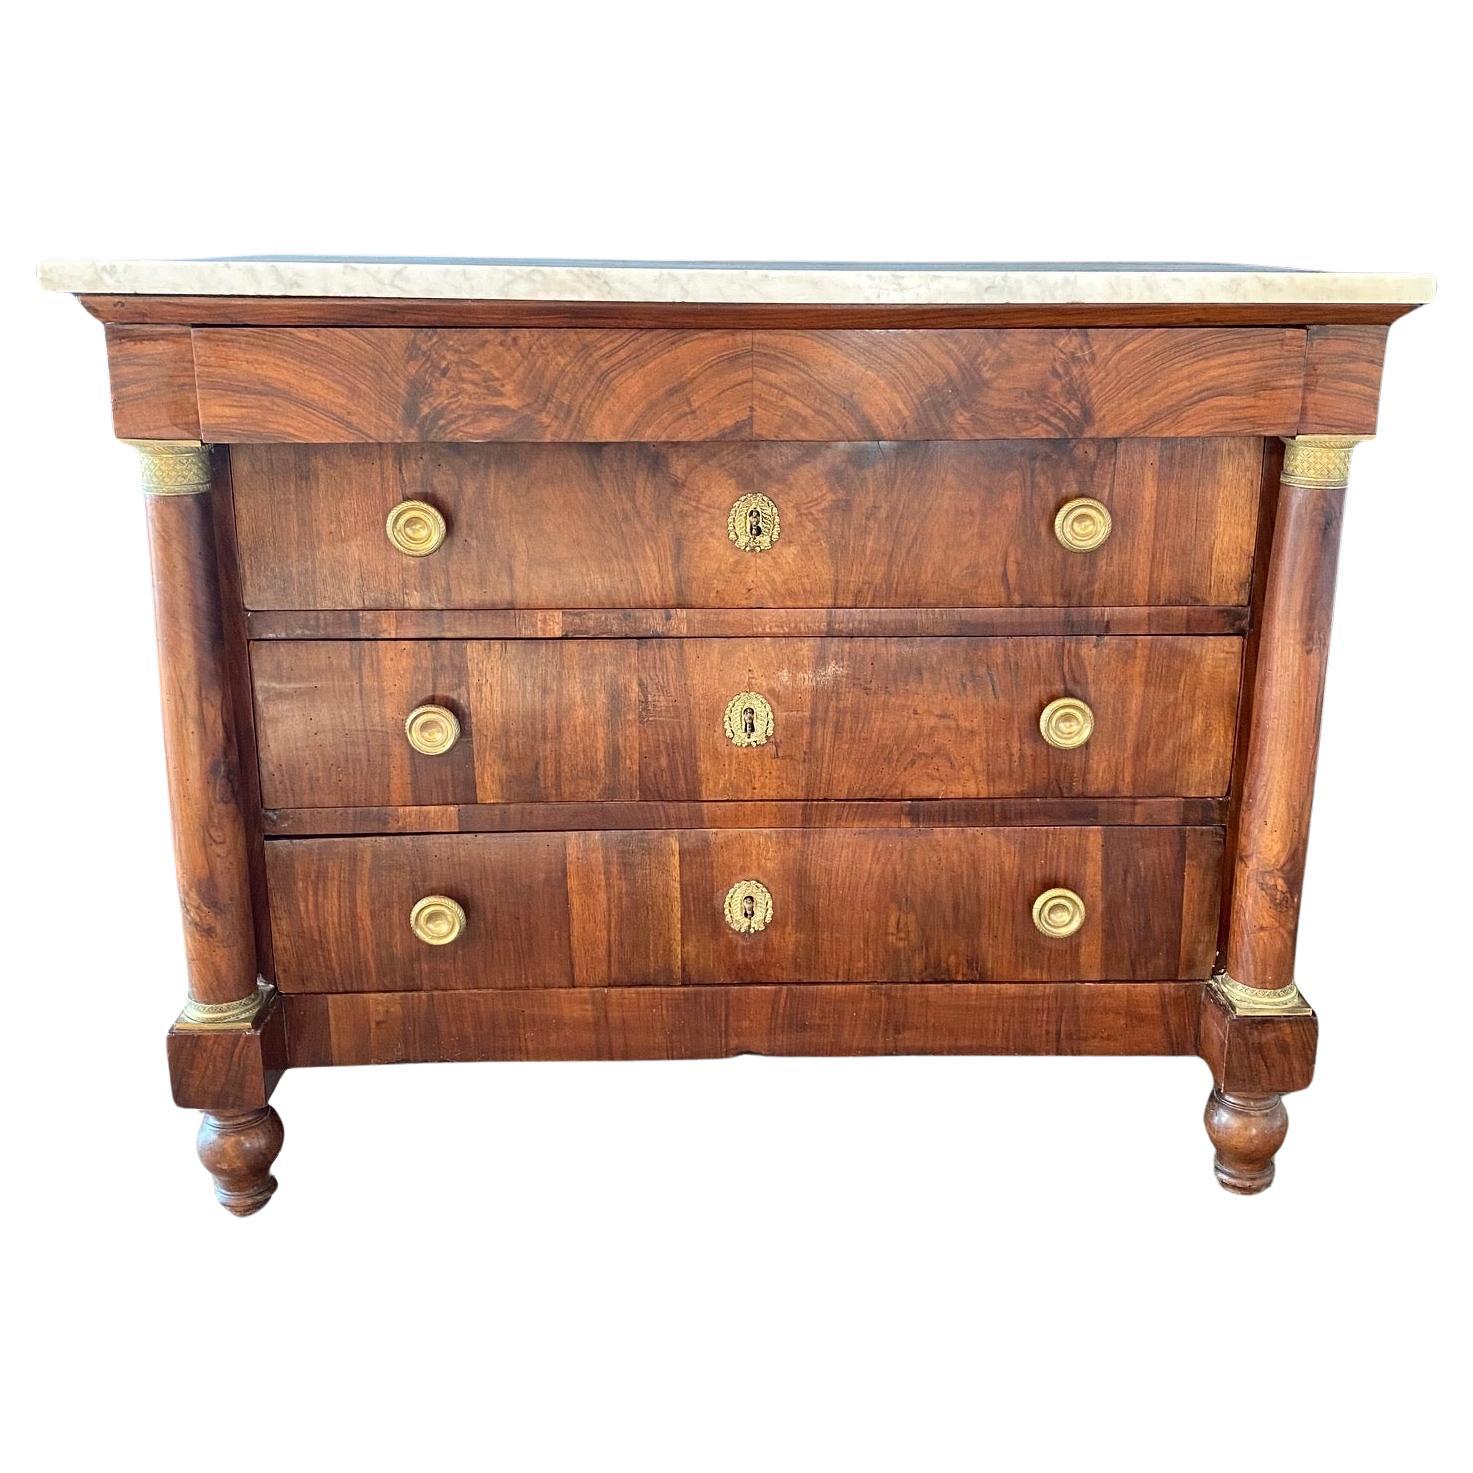 19th Century French Neoclassical Marble Top Commode or Chest of Drawers  For Sale